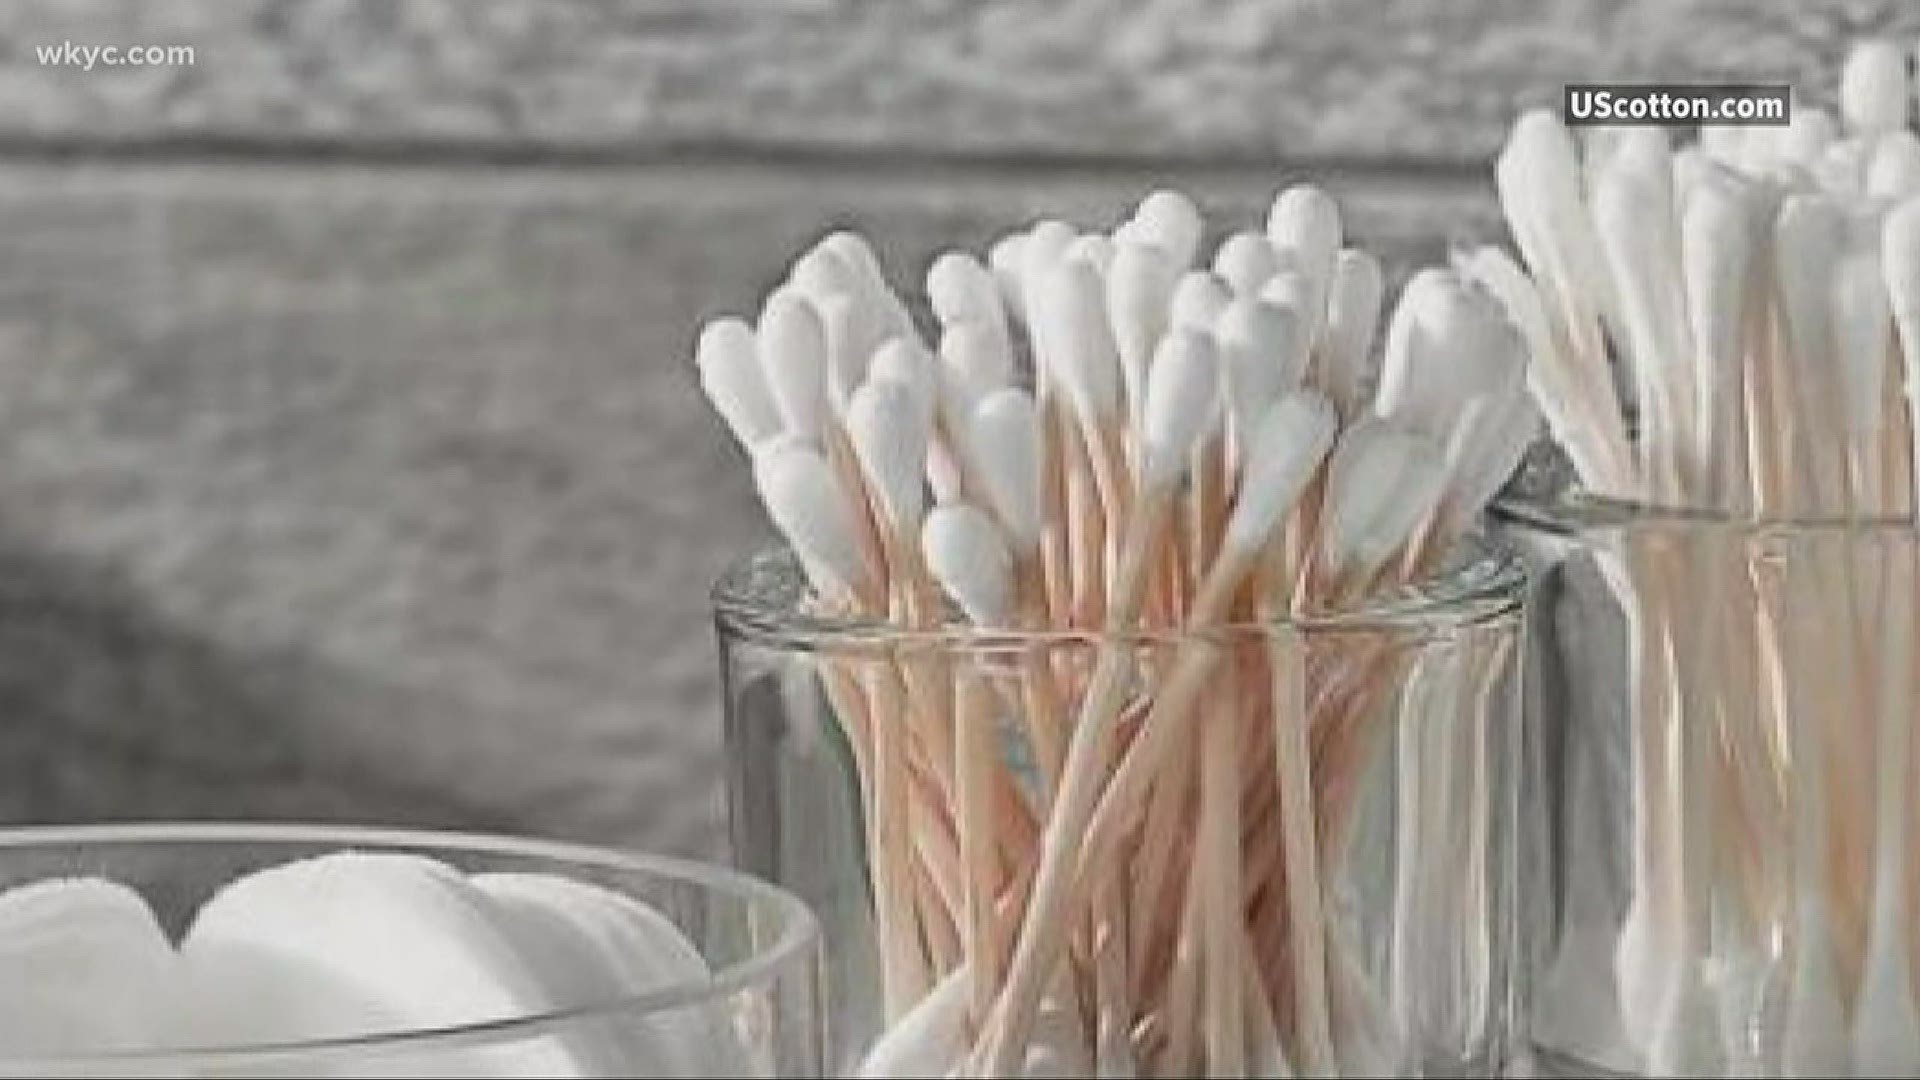 The west side manufacturer plans to make 150 million swabs by the end of the year. Lynna Lai reports.